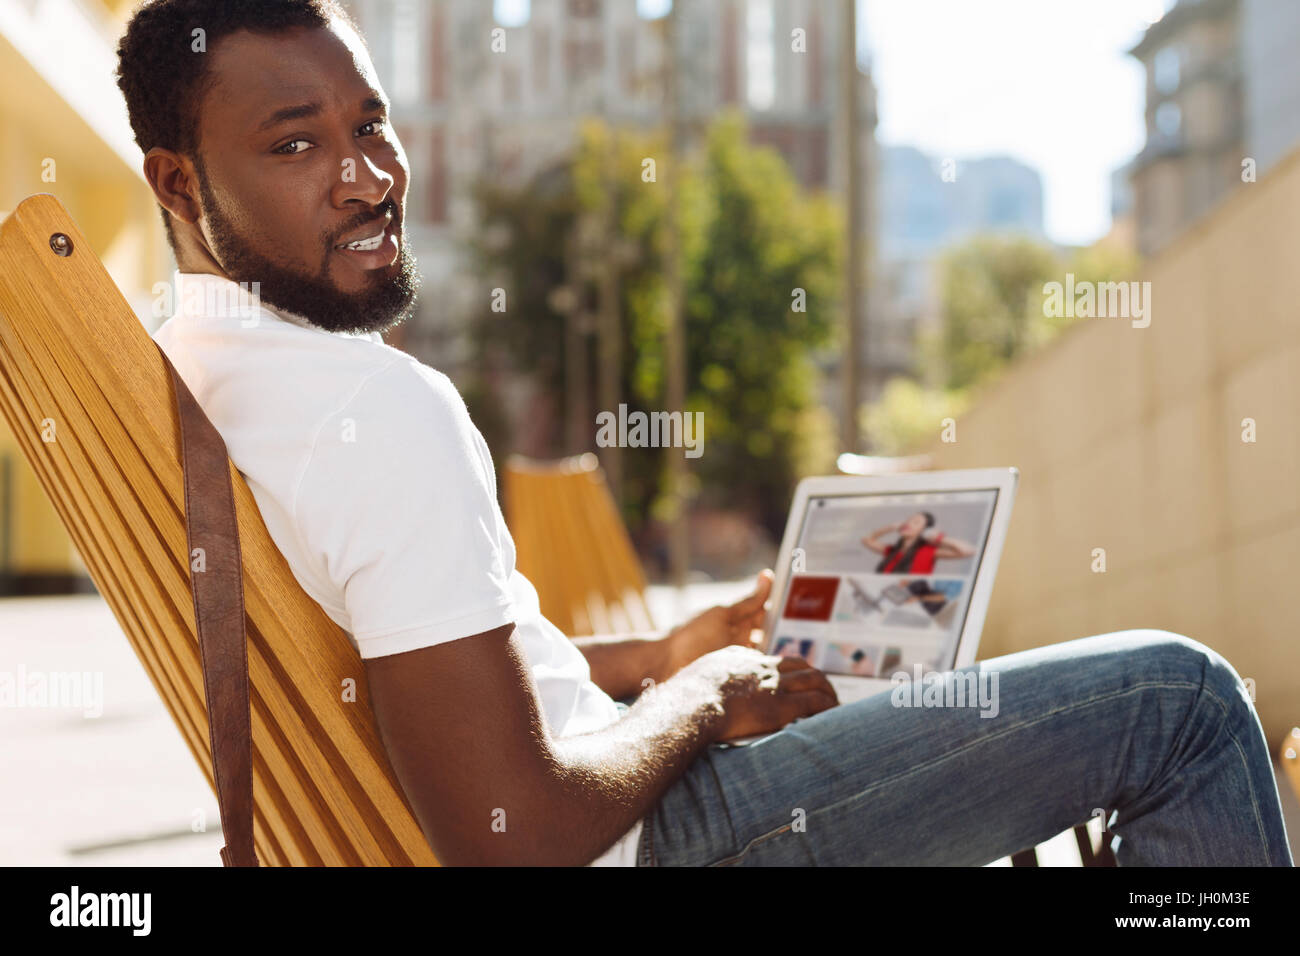 Smart energetic man sitting on a terrace Stock Photo